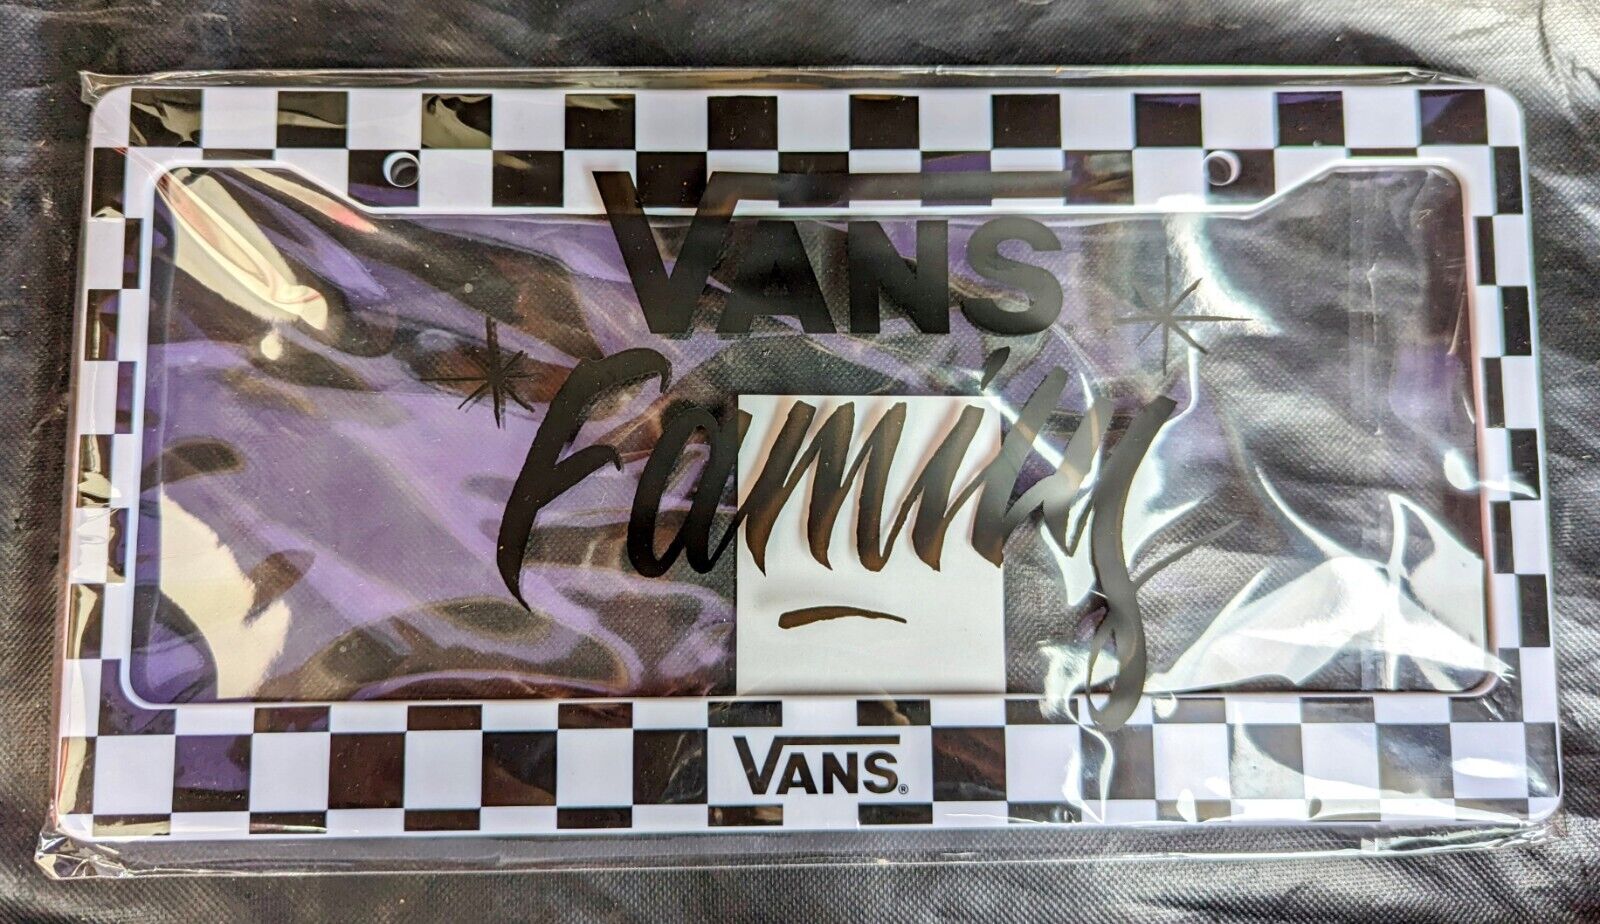 NEW Sealed Vans Family Shoes Exclusive License Plate Frame Cover Checkerboard